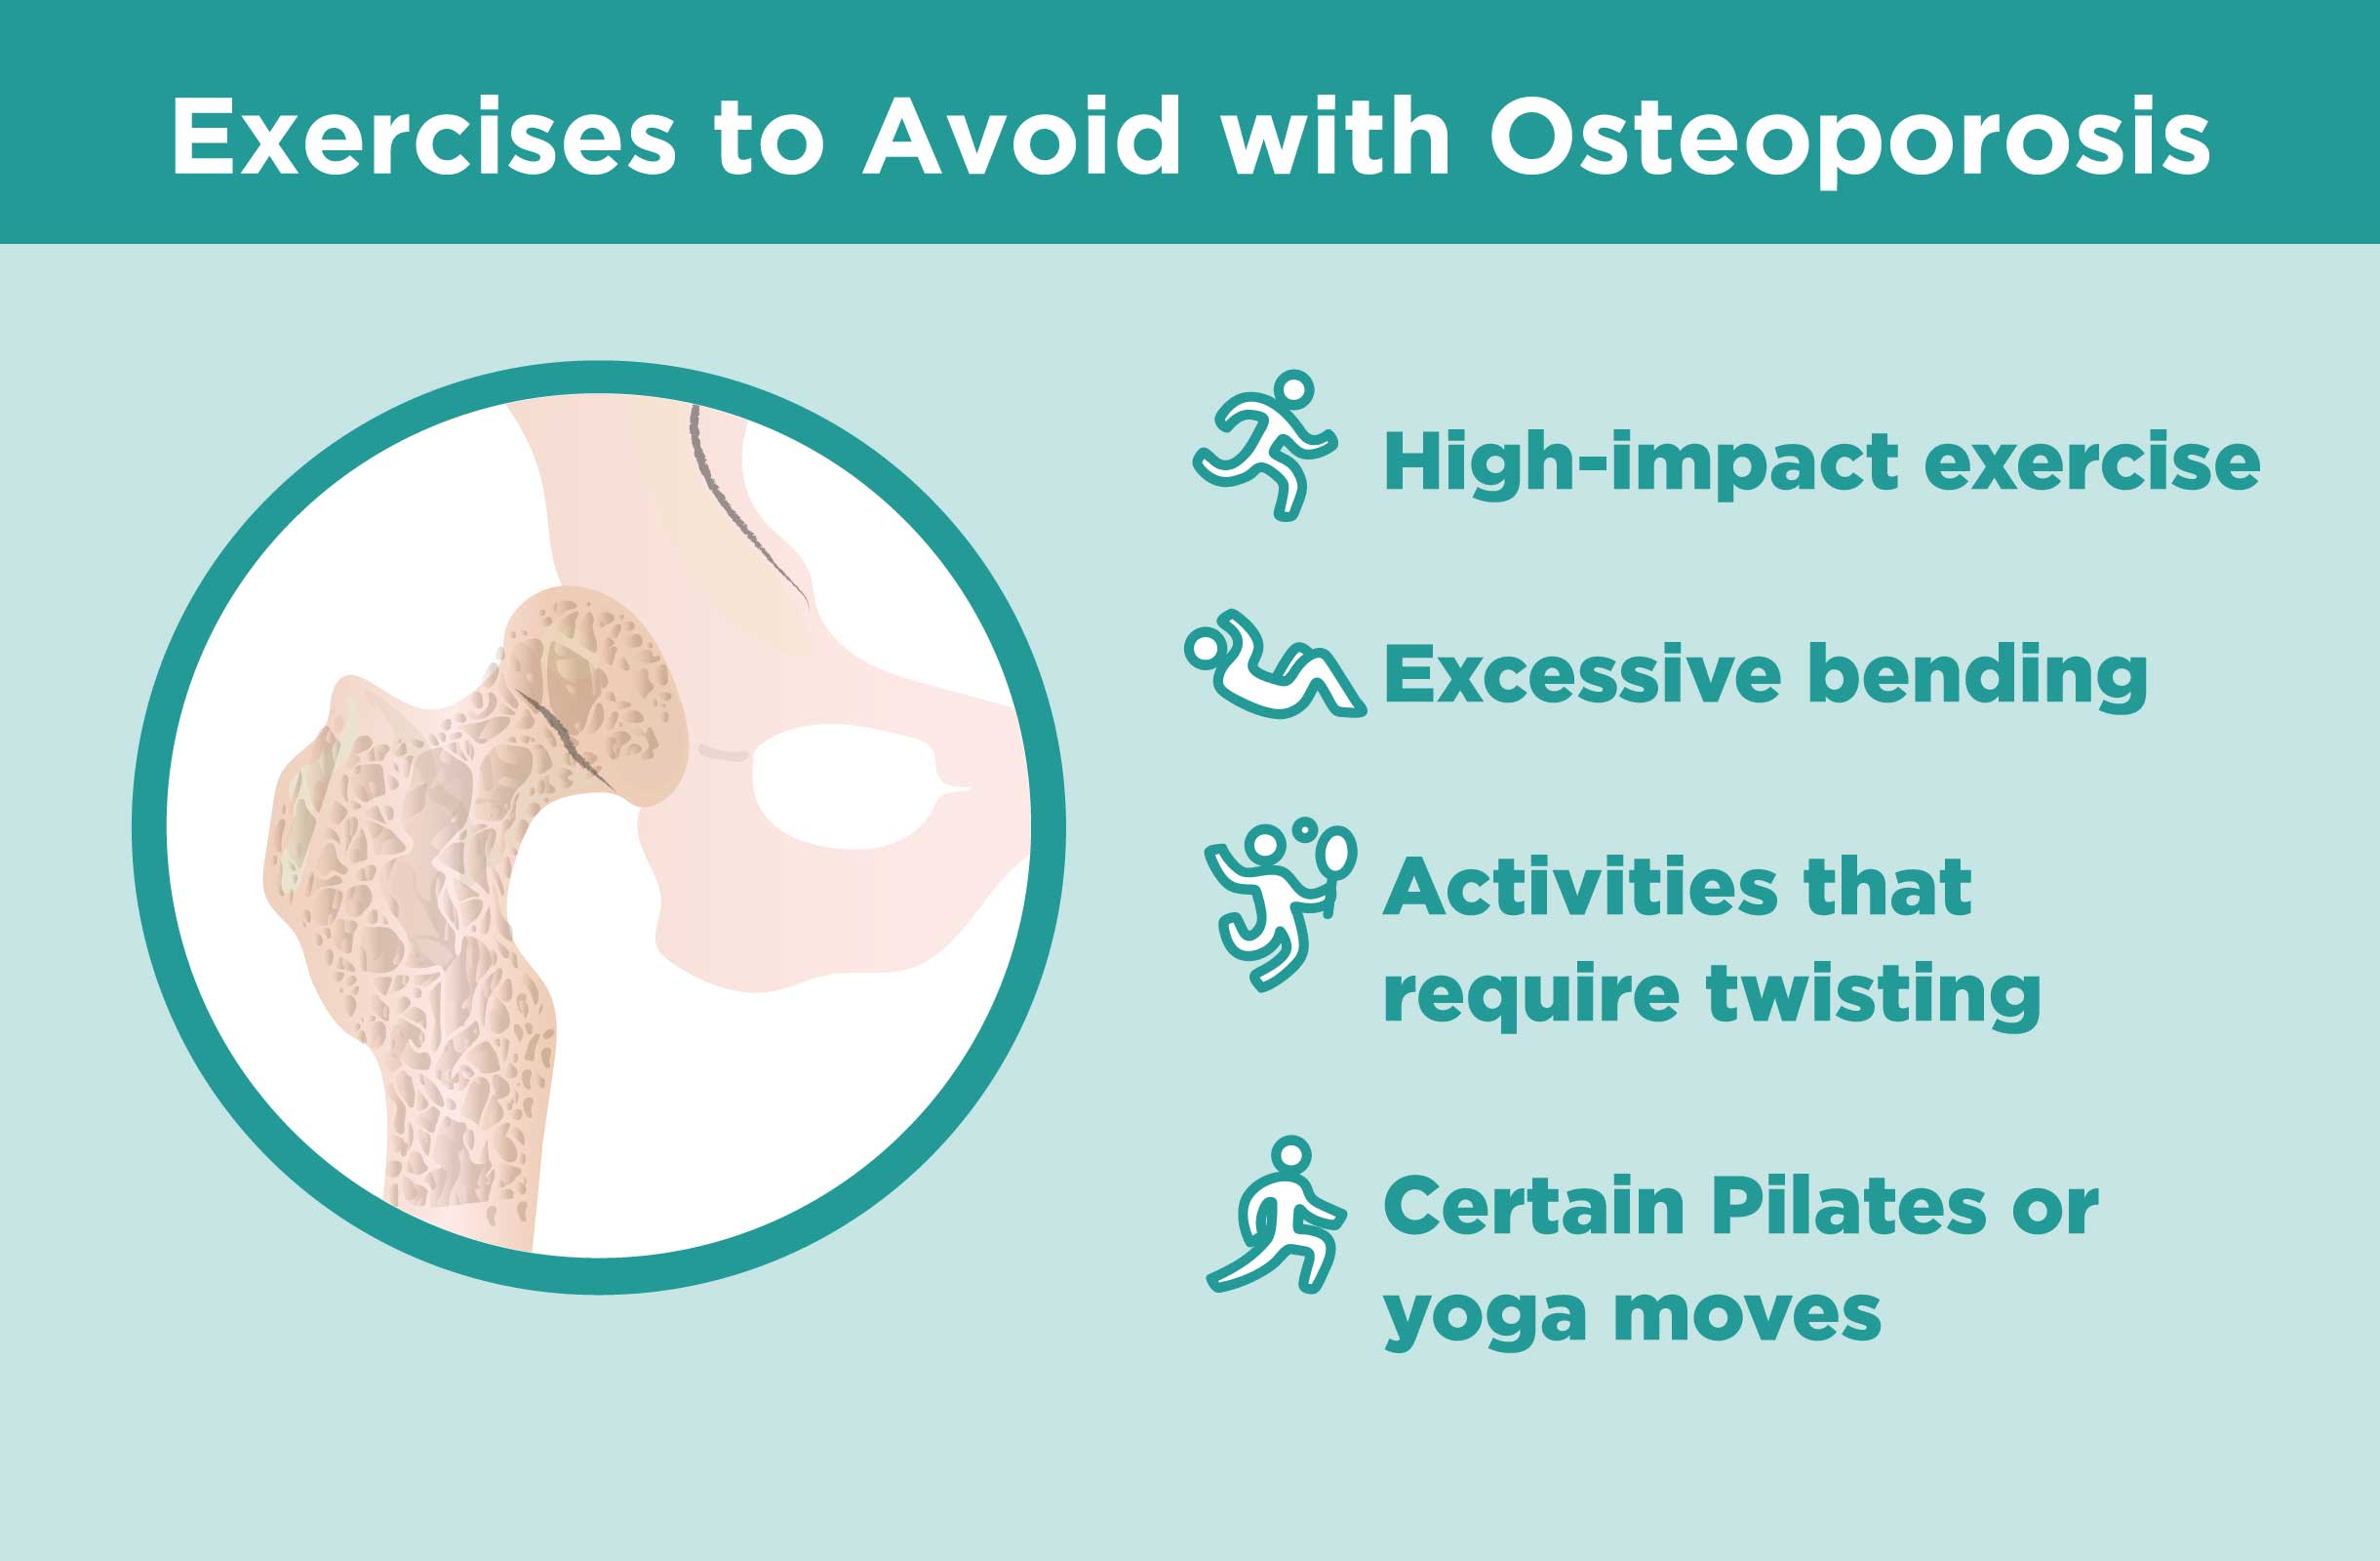 http://creakyjoints.org//wp-content/uploads/0919_Exercise_Avoid_Osteoporosis.jpg